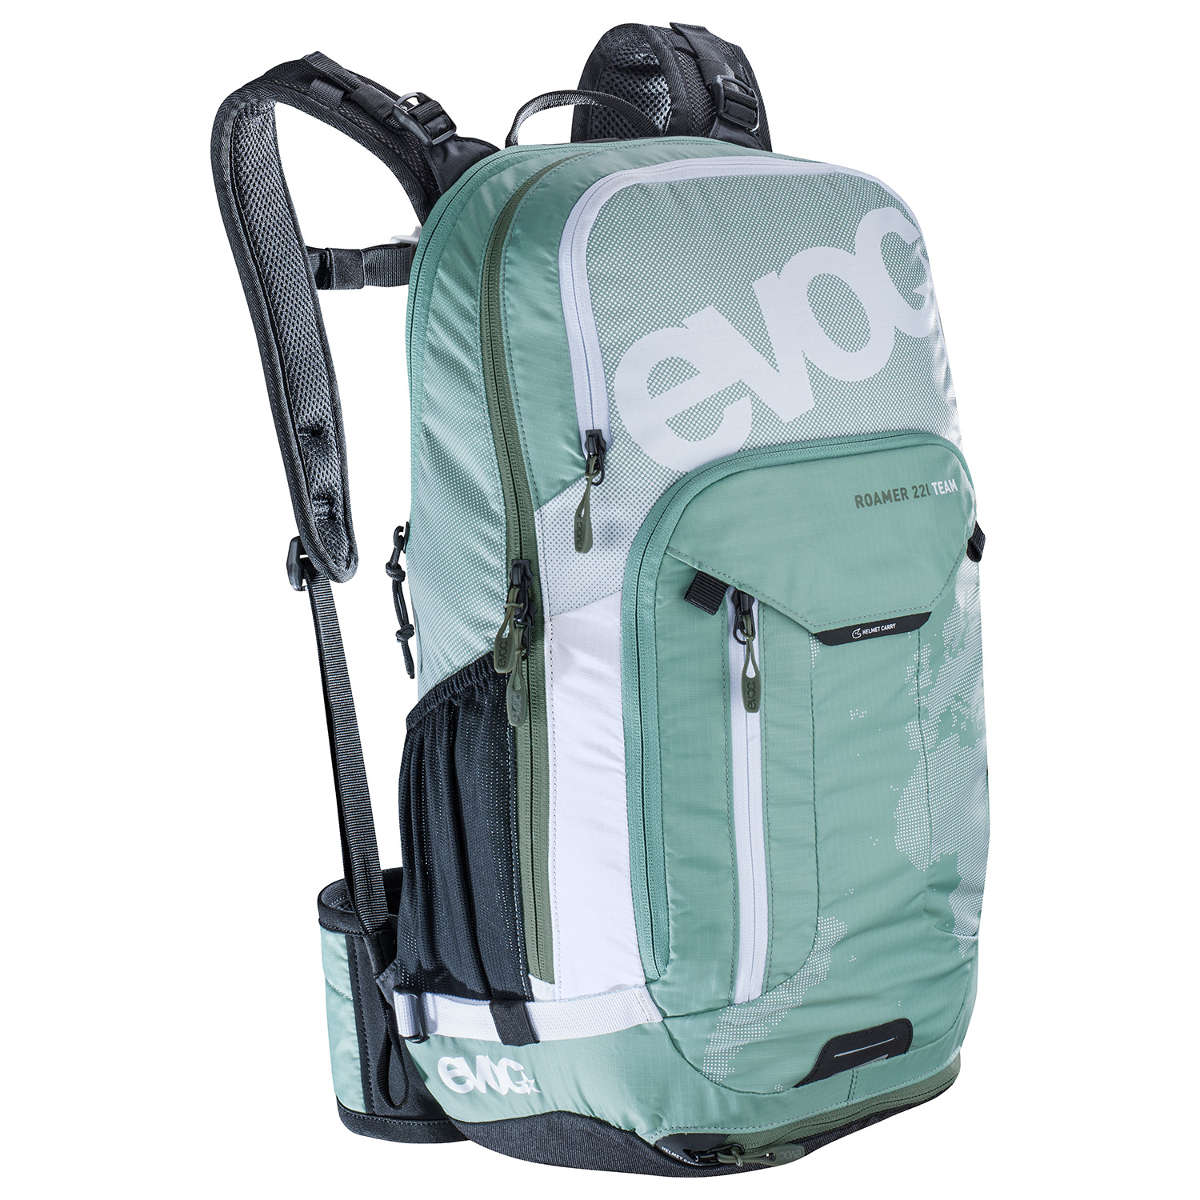 Evoc Backpack with Hydration System Compartment Roamer Team Light Petrol-White, 22 Liter